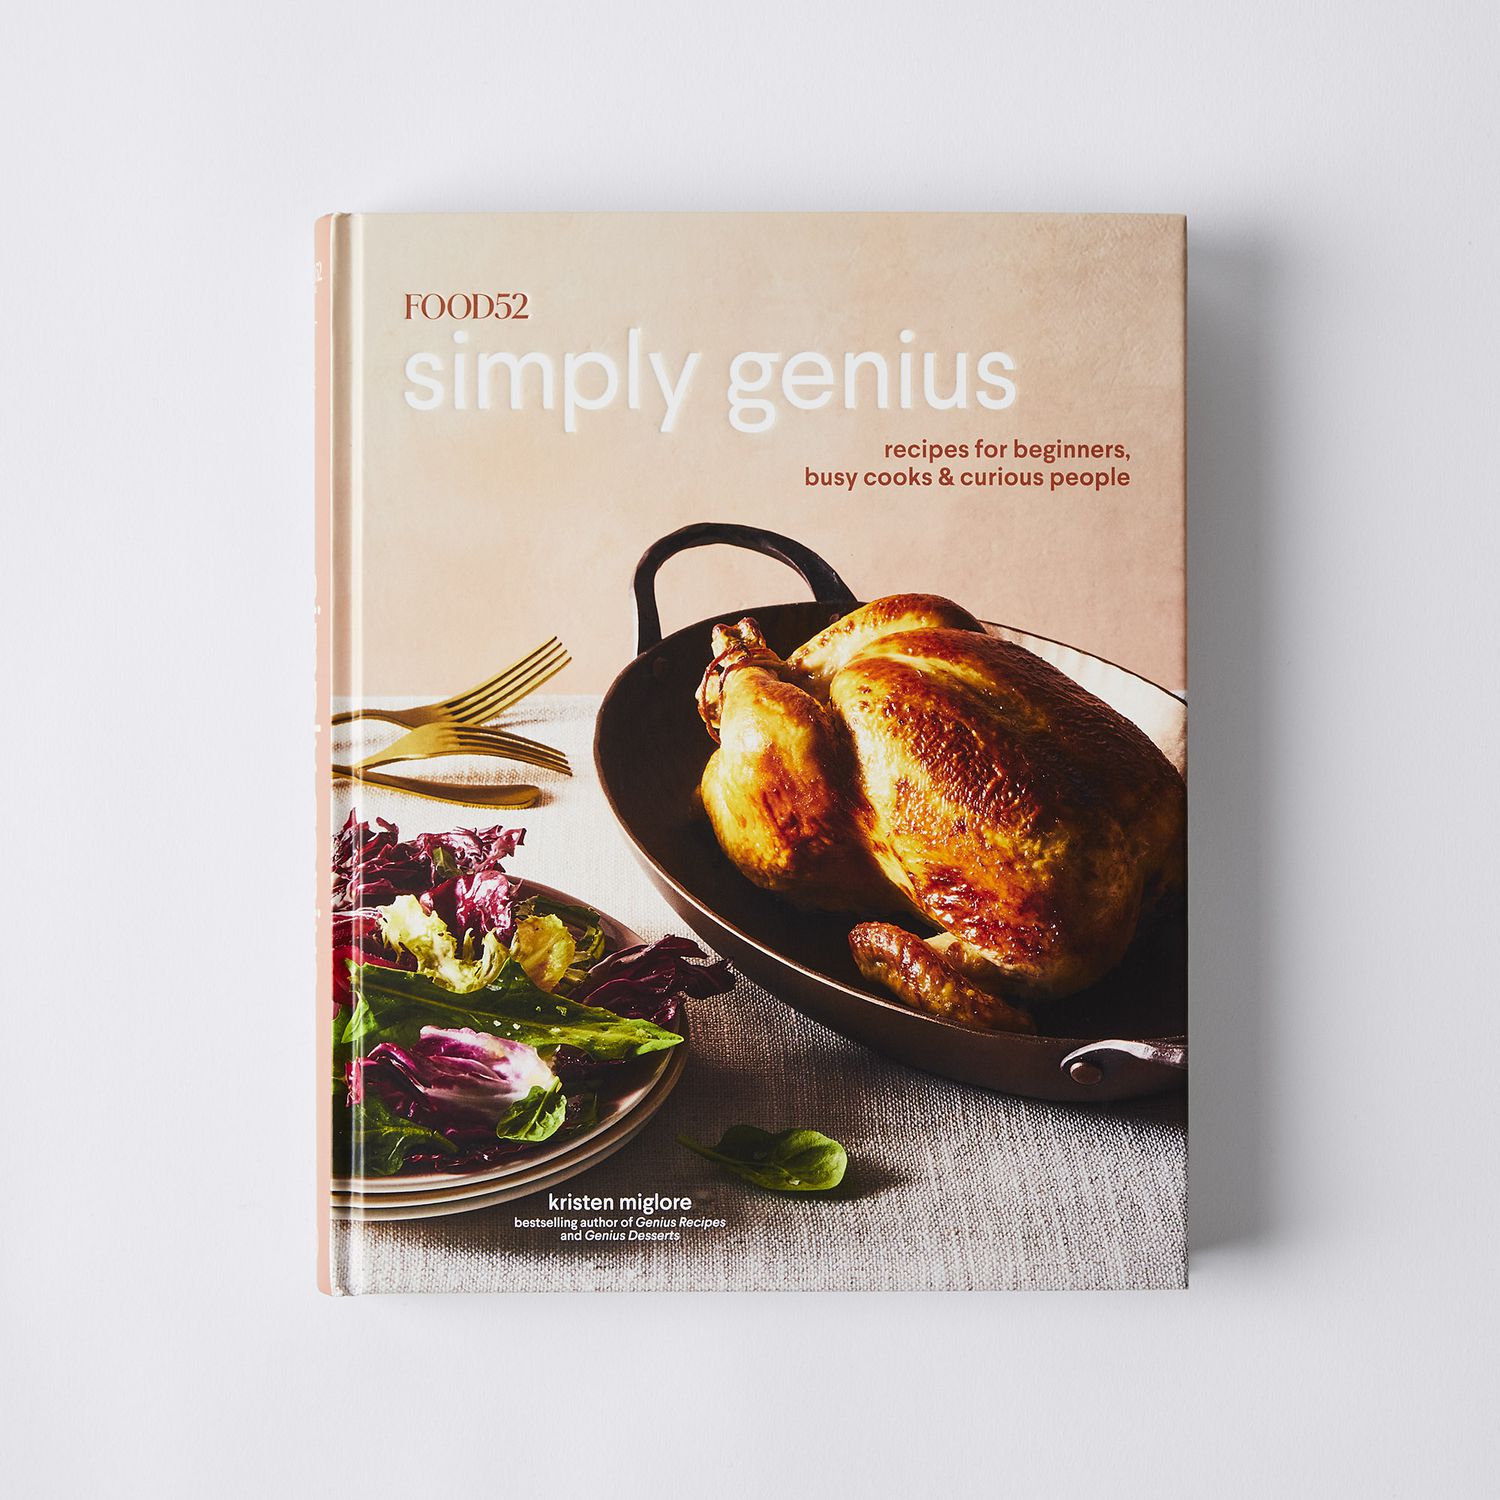 Food52 Simply Genius Cookbook: Recipes for Beginners, Busy Cooks & Curious People